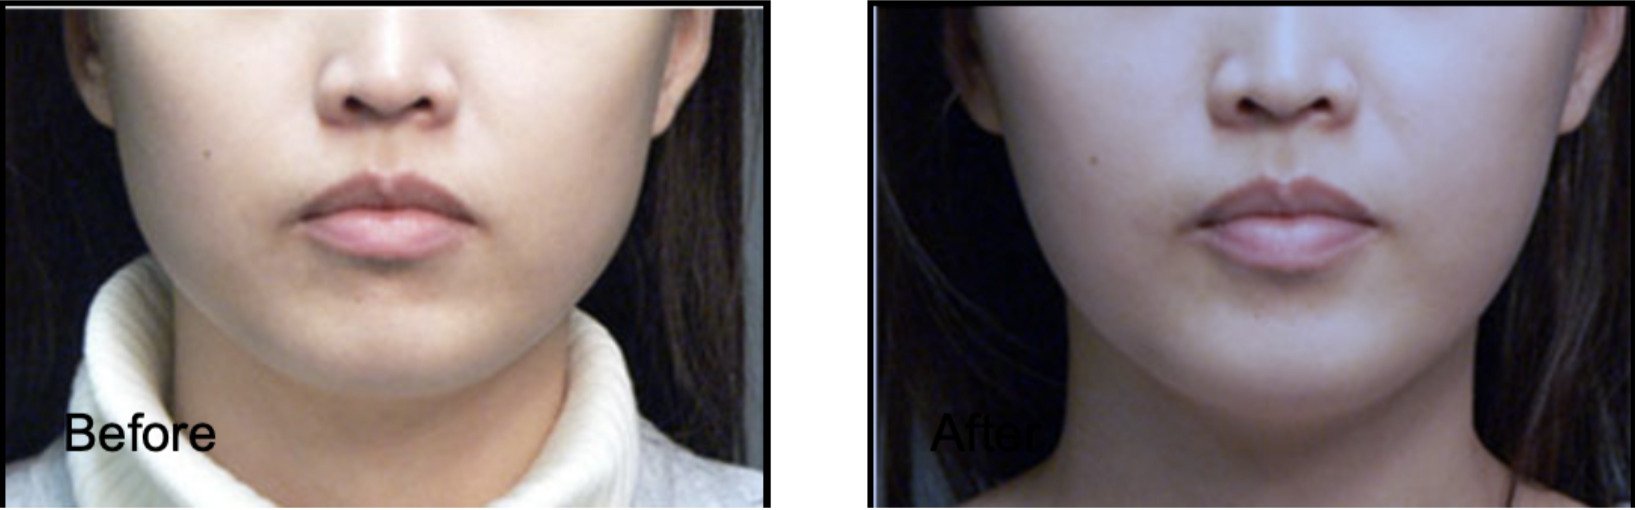 Female patient's lower face before and after Botox face slimming and V face shape contouring